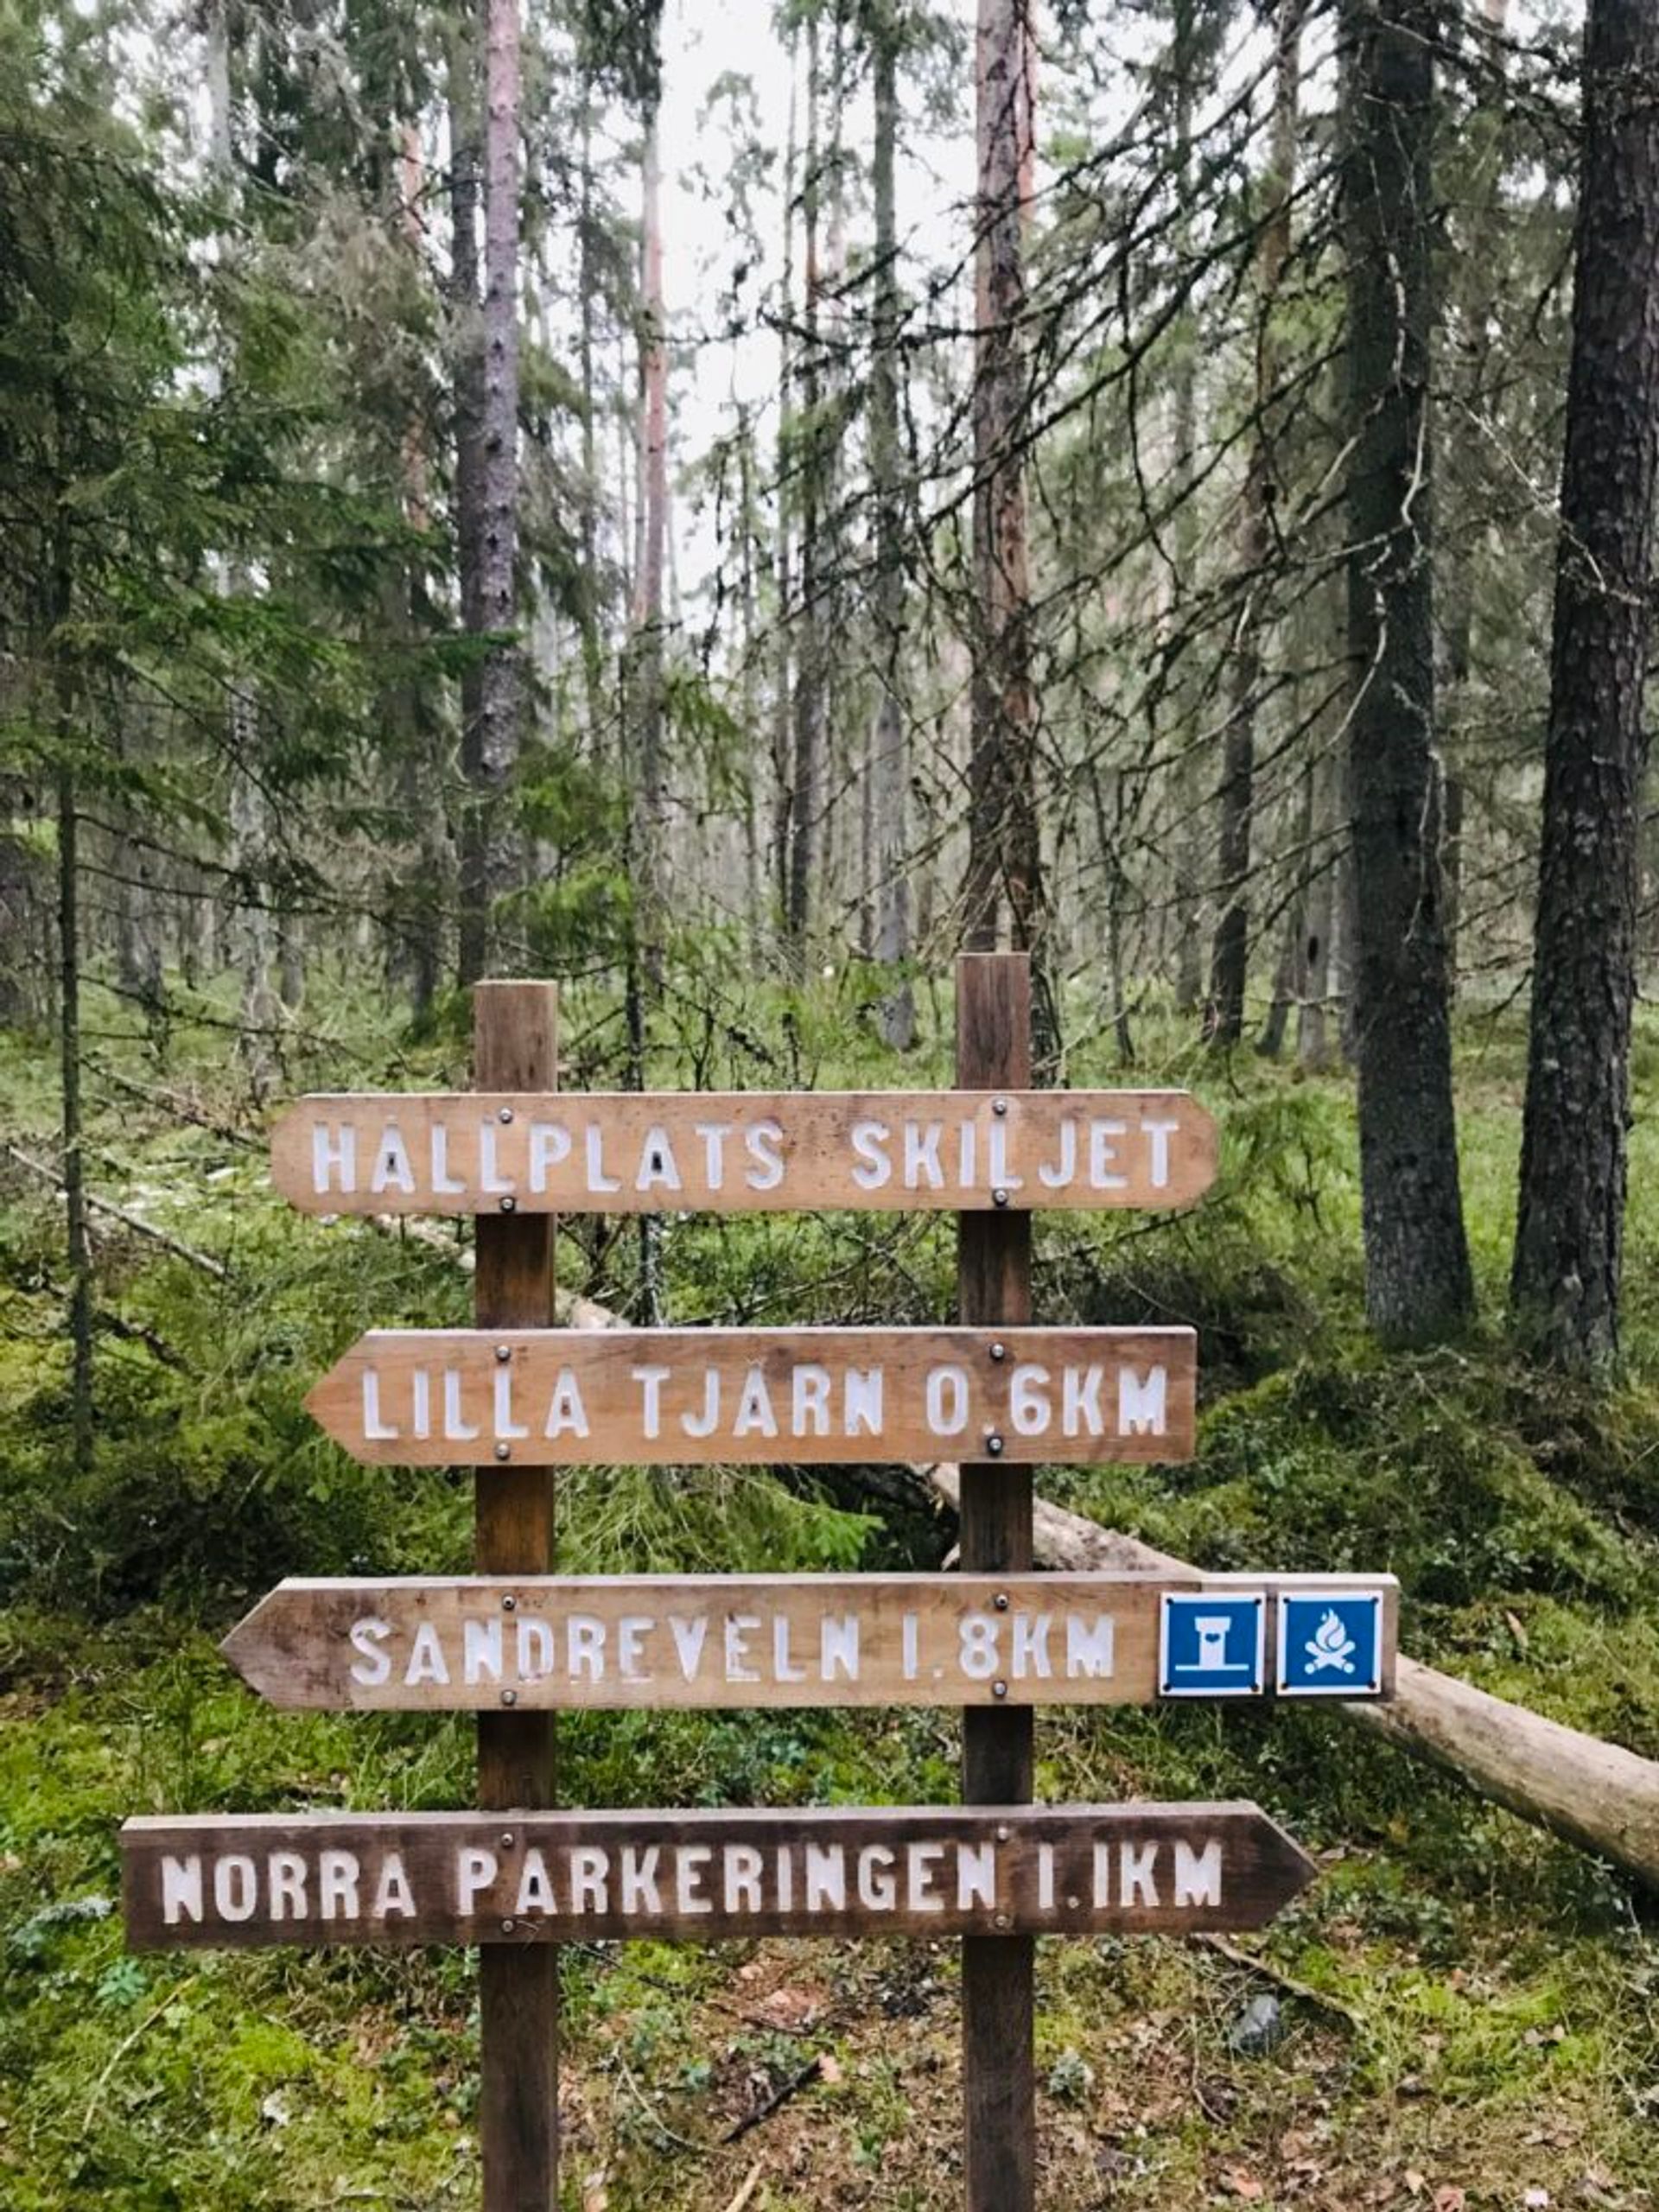 Wooden signs in a forest.